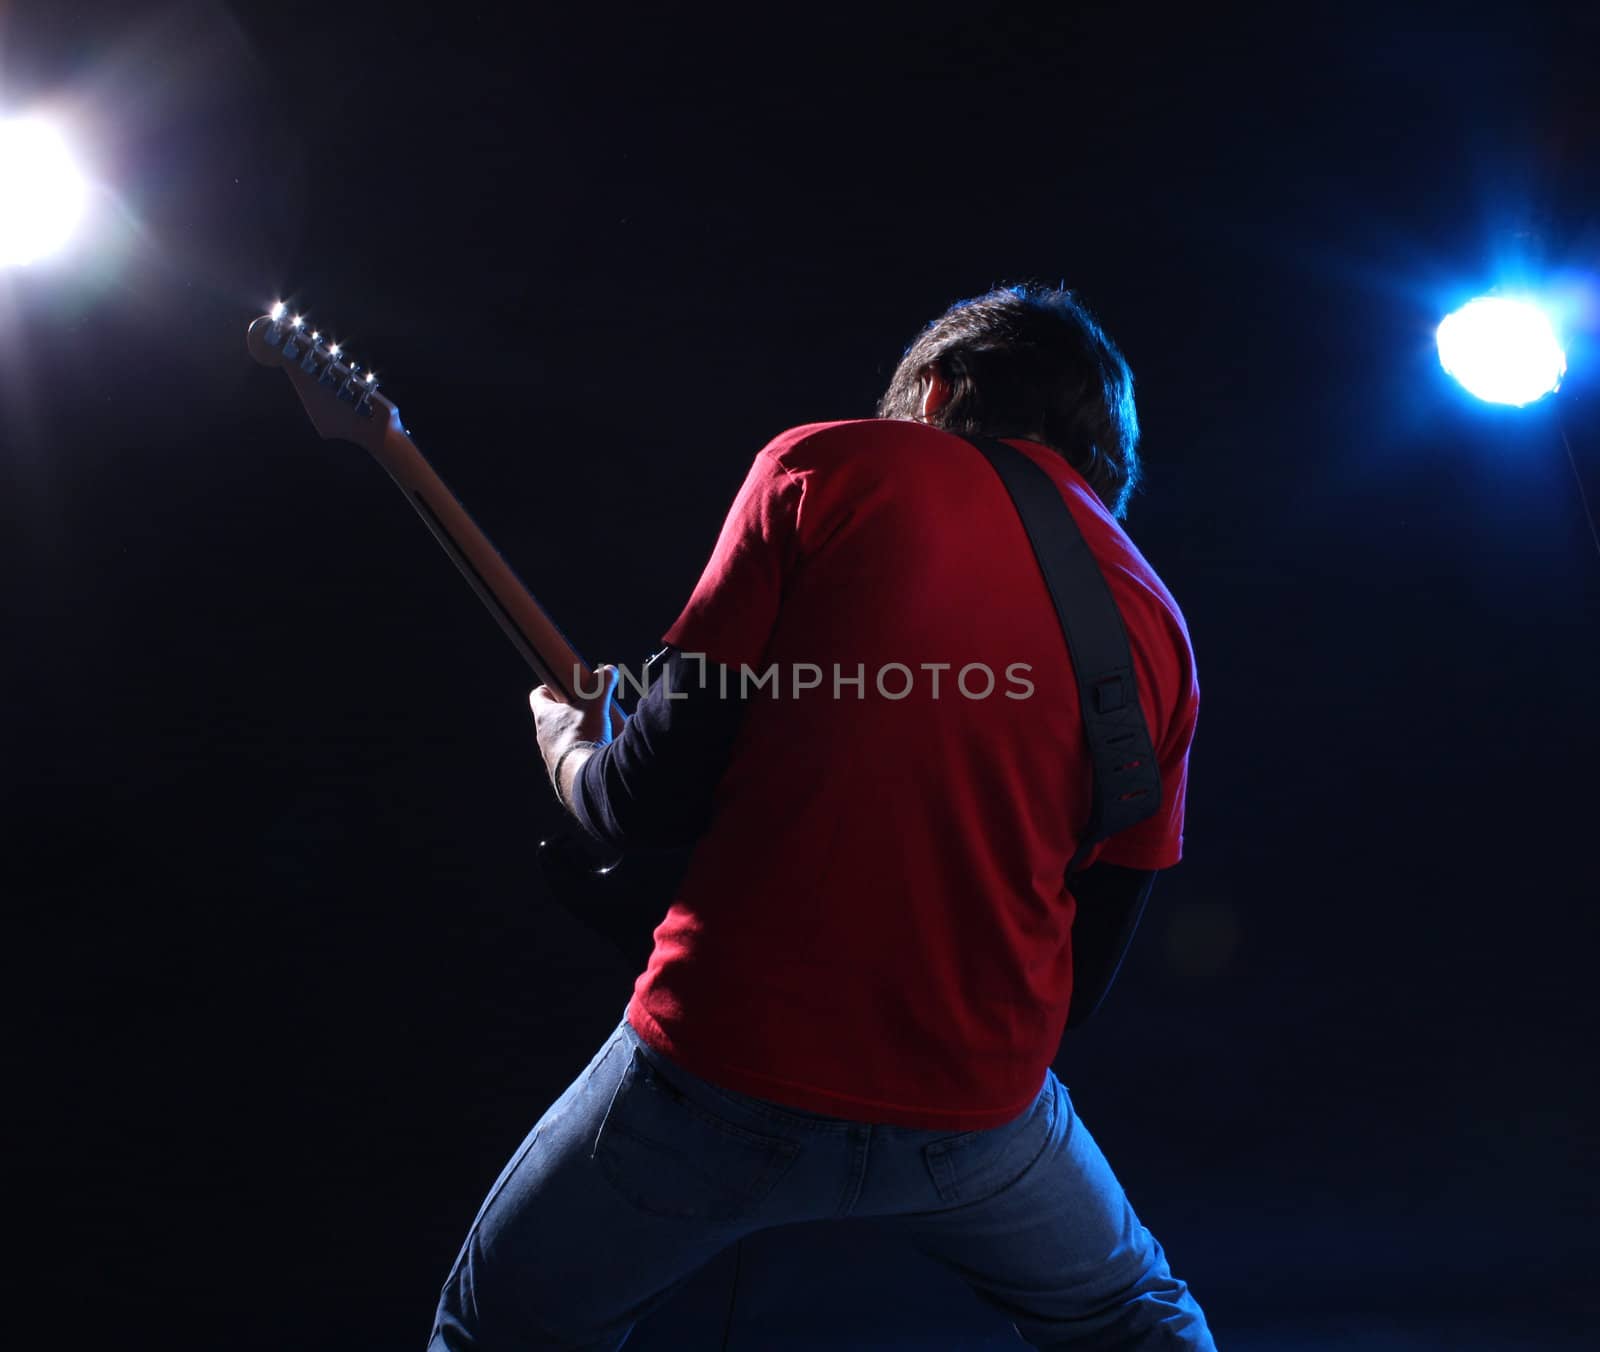 Musician playing electric guitar on stage